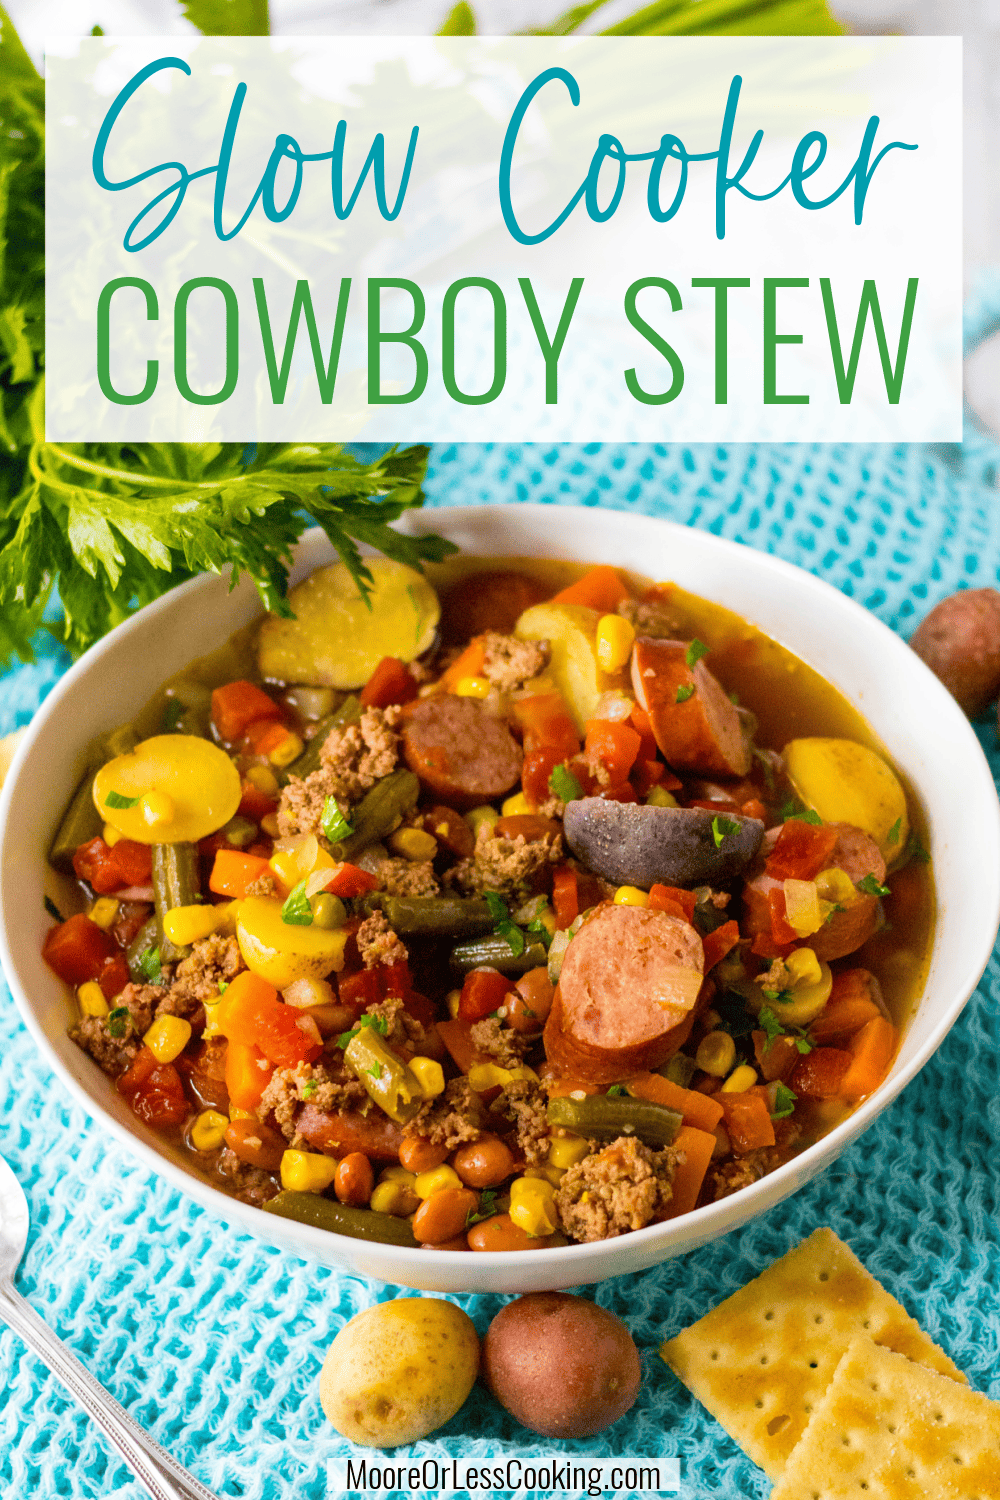 This easy Slow Cooker Cowboy Stew is packed with flavor from the meat, sausage, veggies, beans, and spices. It's a dump-and-go meal perfect for busy days, chilly weather, or when you need to feed a crowd. via @Mooreorlesscook